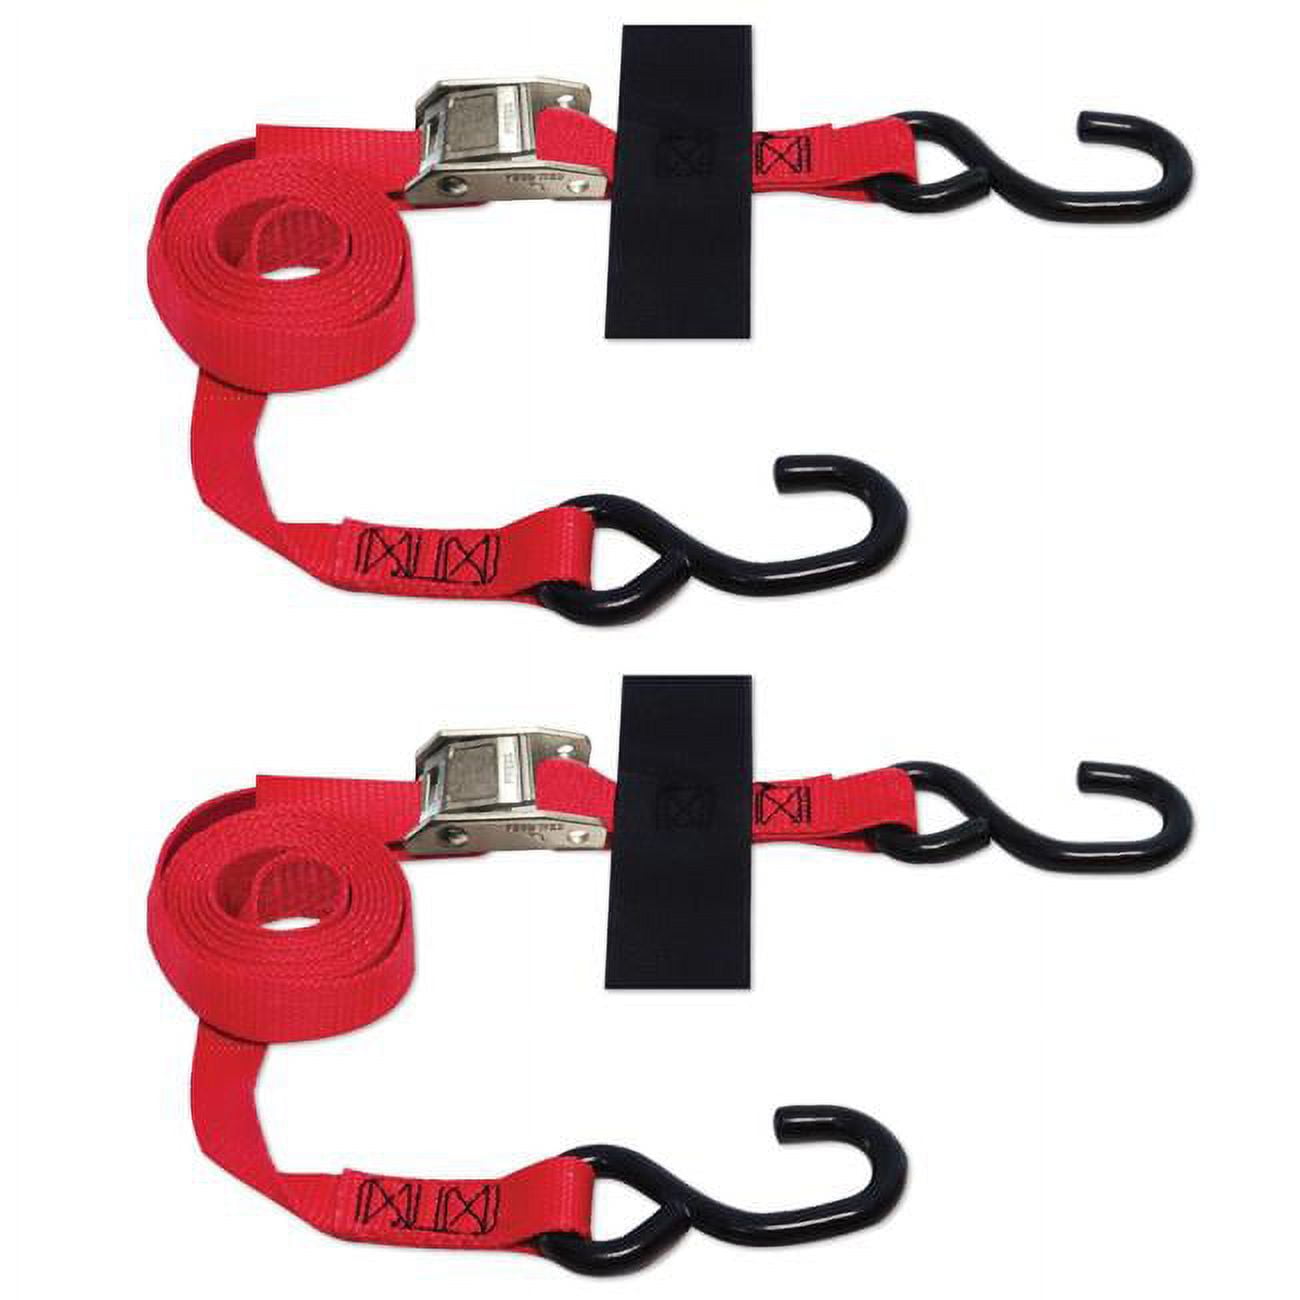 1-3/8 x 7' Ratchet Strap with S-Hooks - 8 Pack 